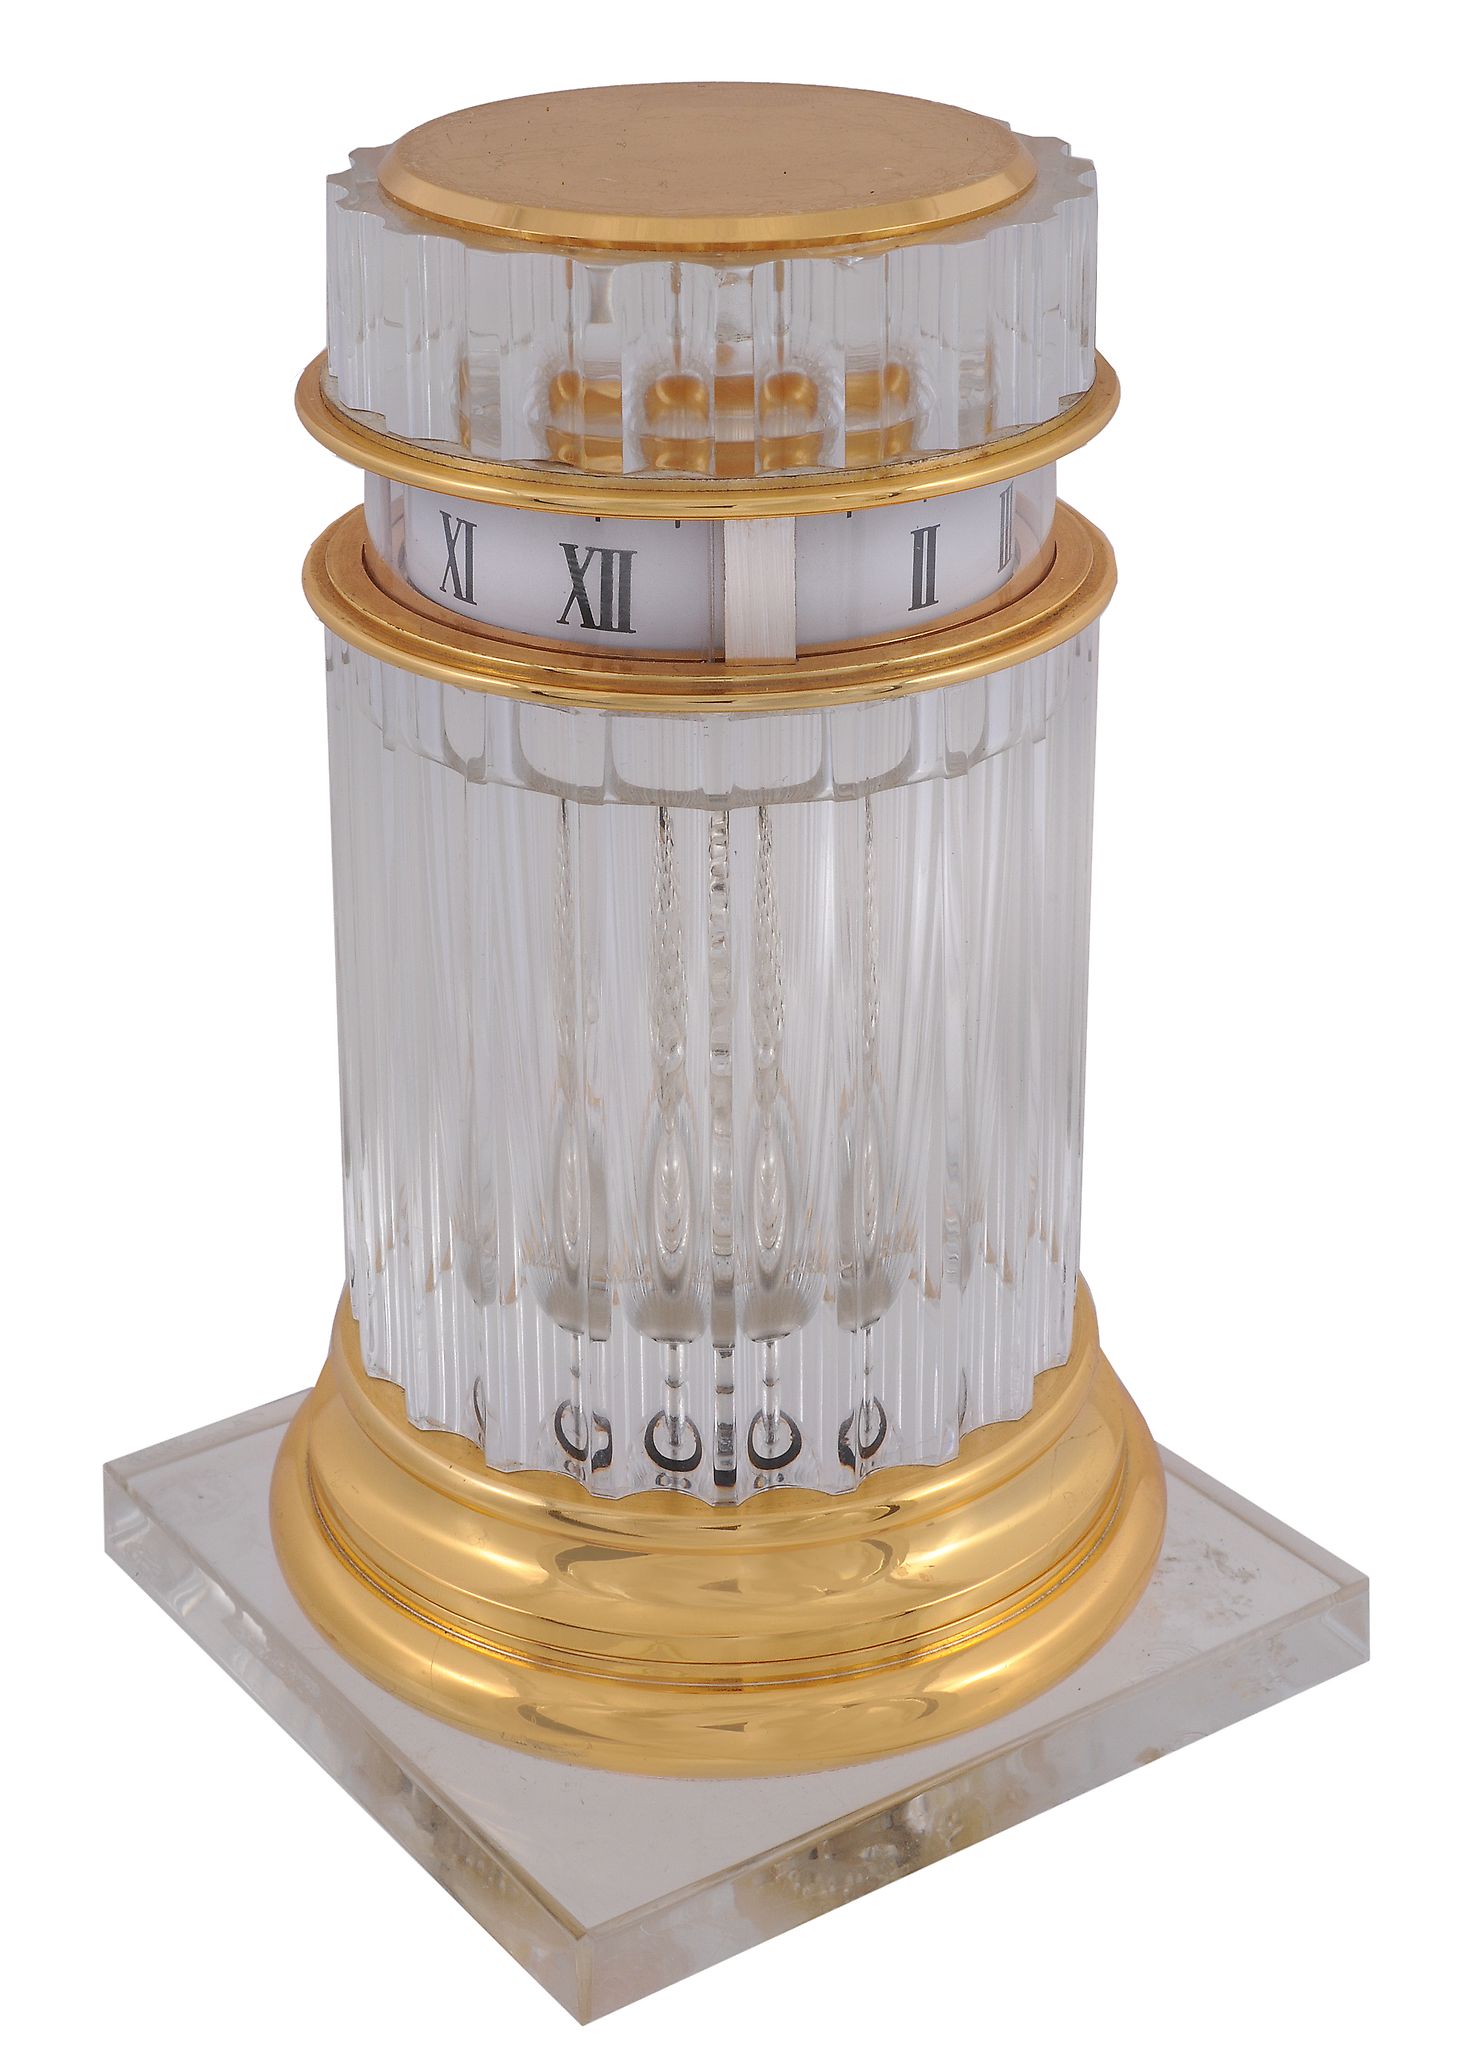 Baccarat, Hour Lavigne, a glass and gilt metal column clock  Baccarat, Hour Lavigne, a glass and